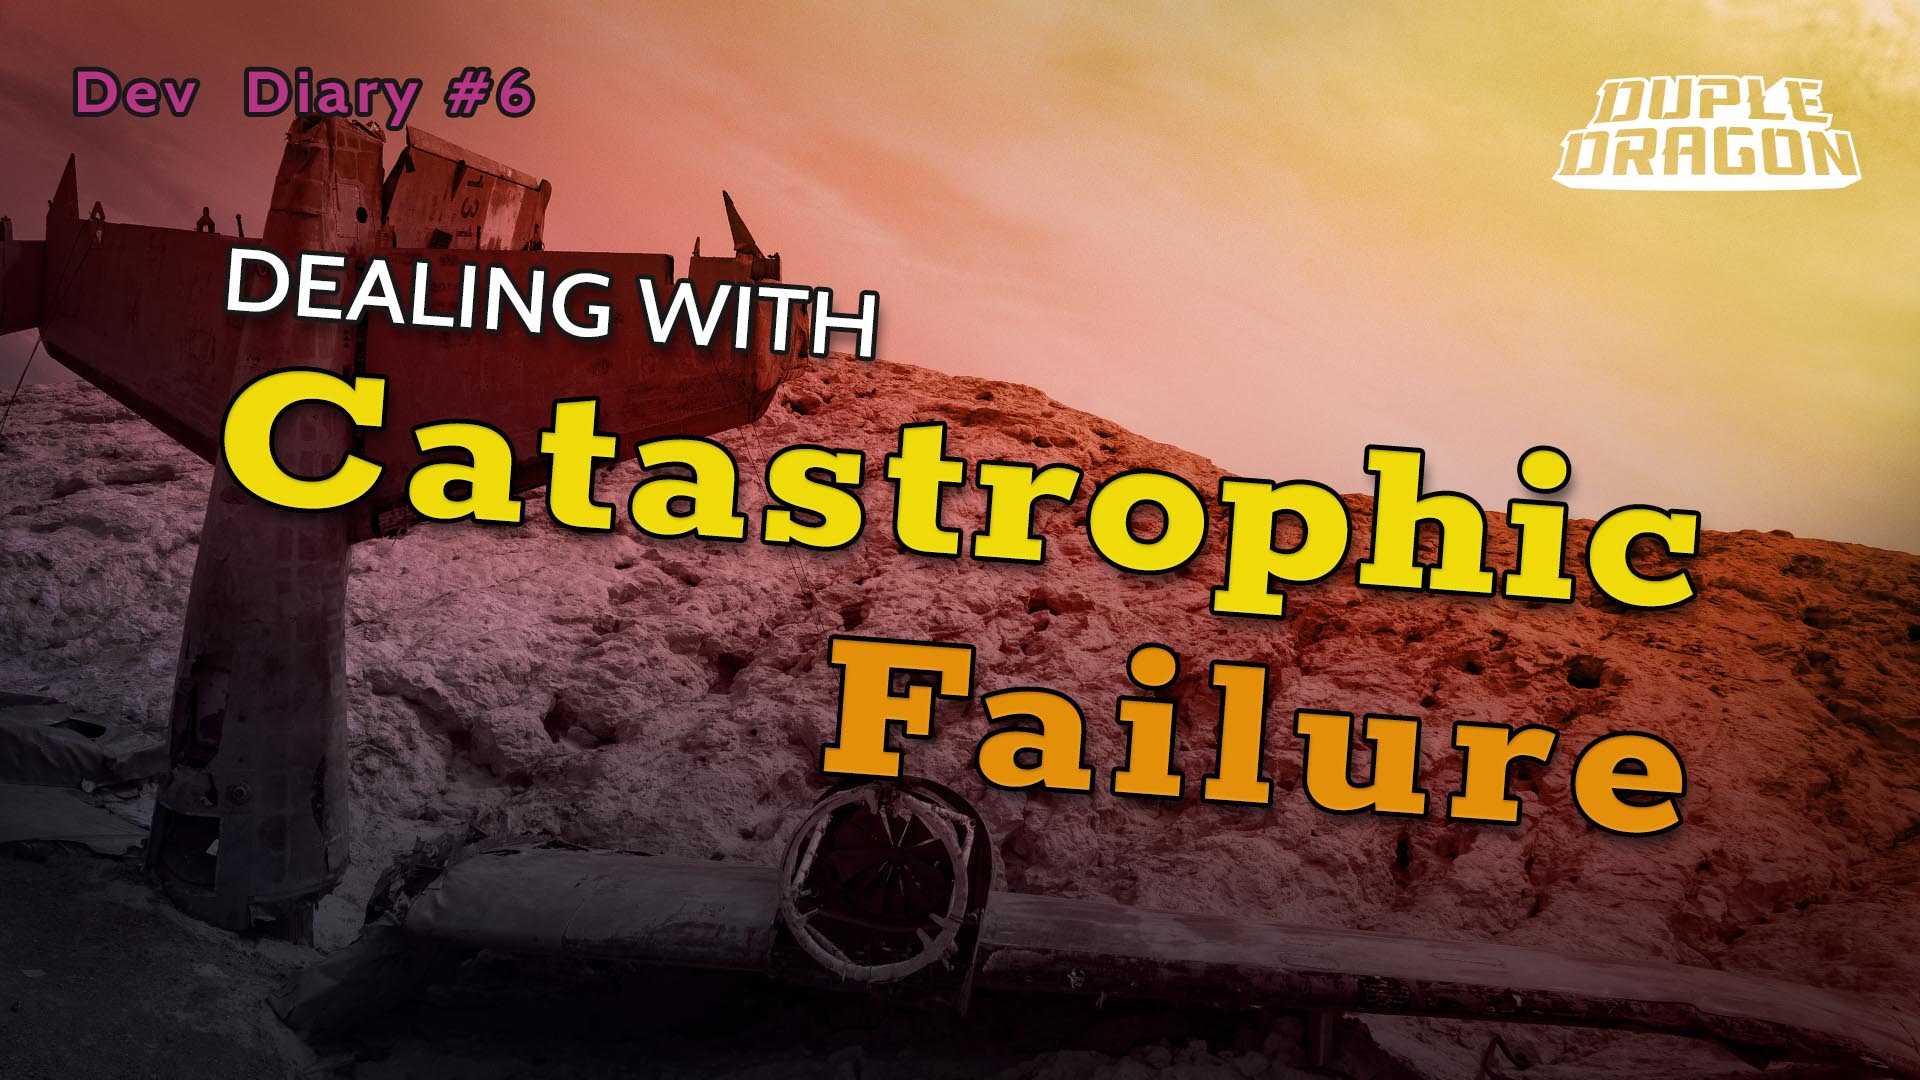 Dev Diary #6: Dealing with Catastrophic Failure